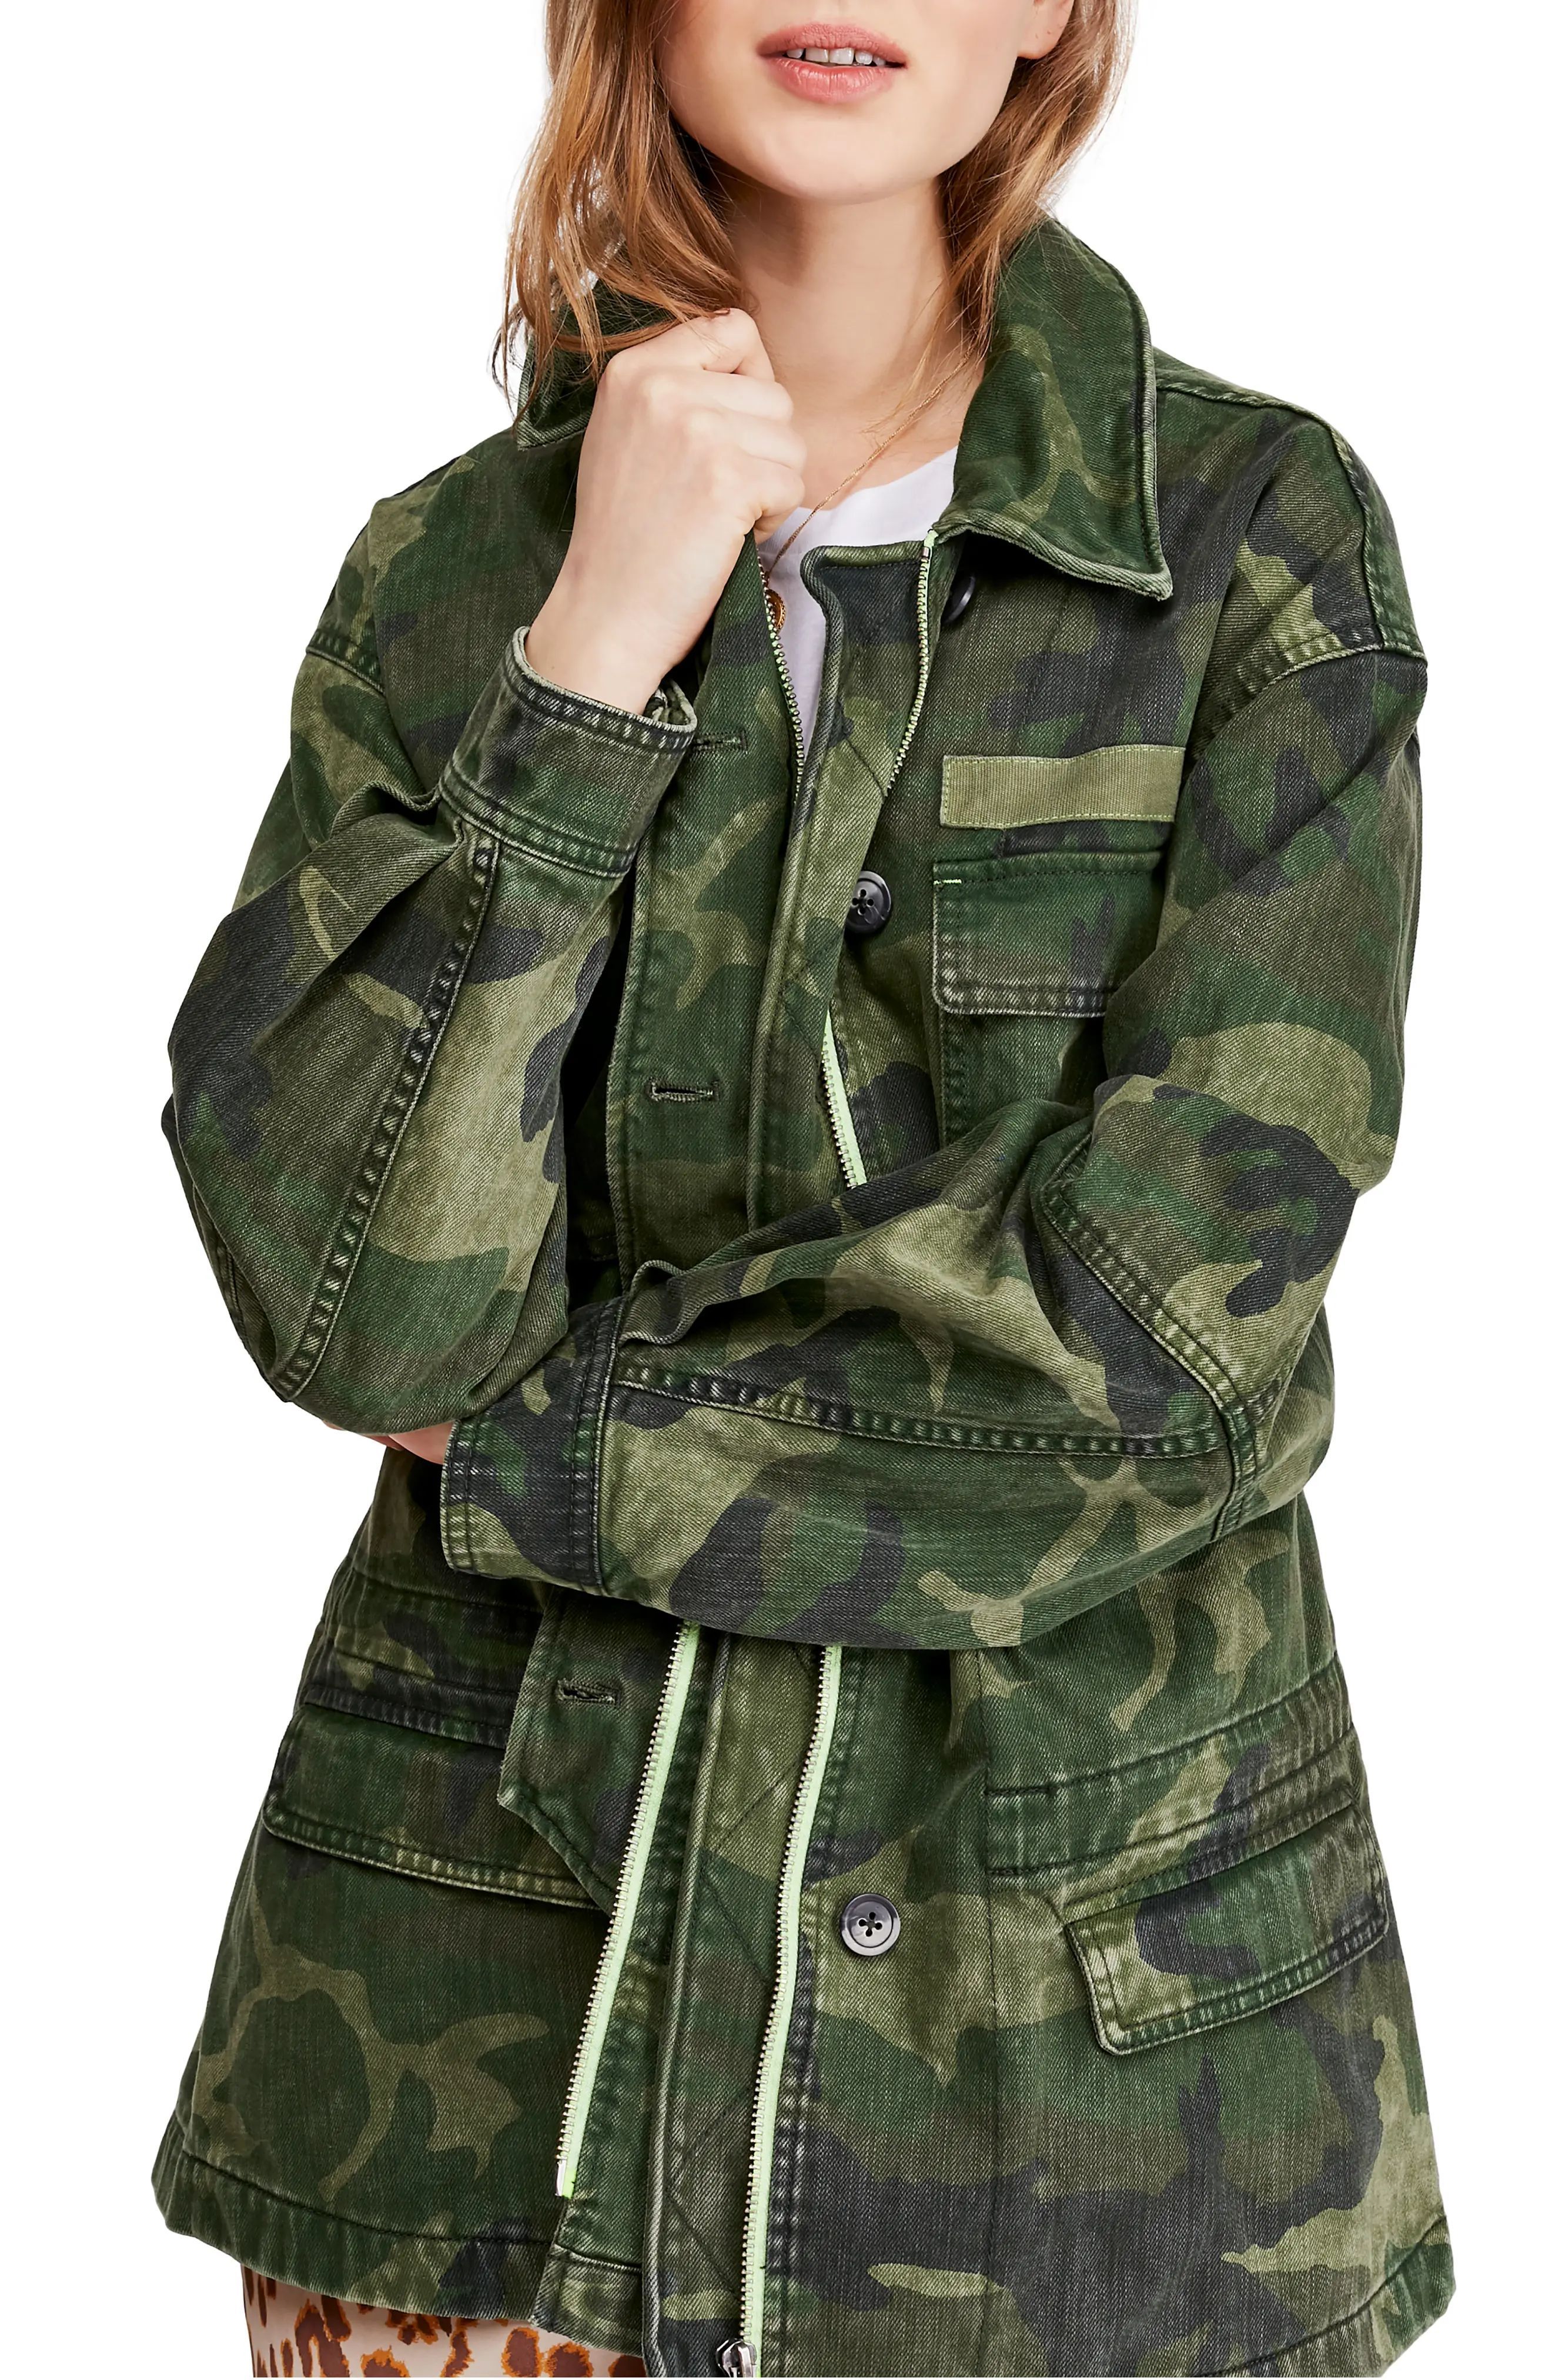 Color: Greens Size Type: Regular Size (Women's): S Type: Jacket Style: Basic Coat Outer Shell Material: 100% Cotton